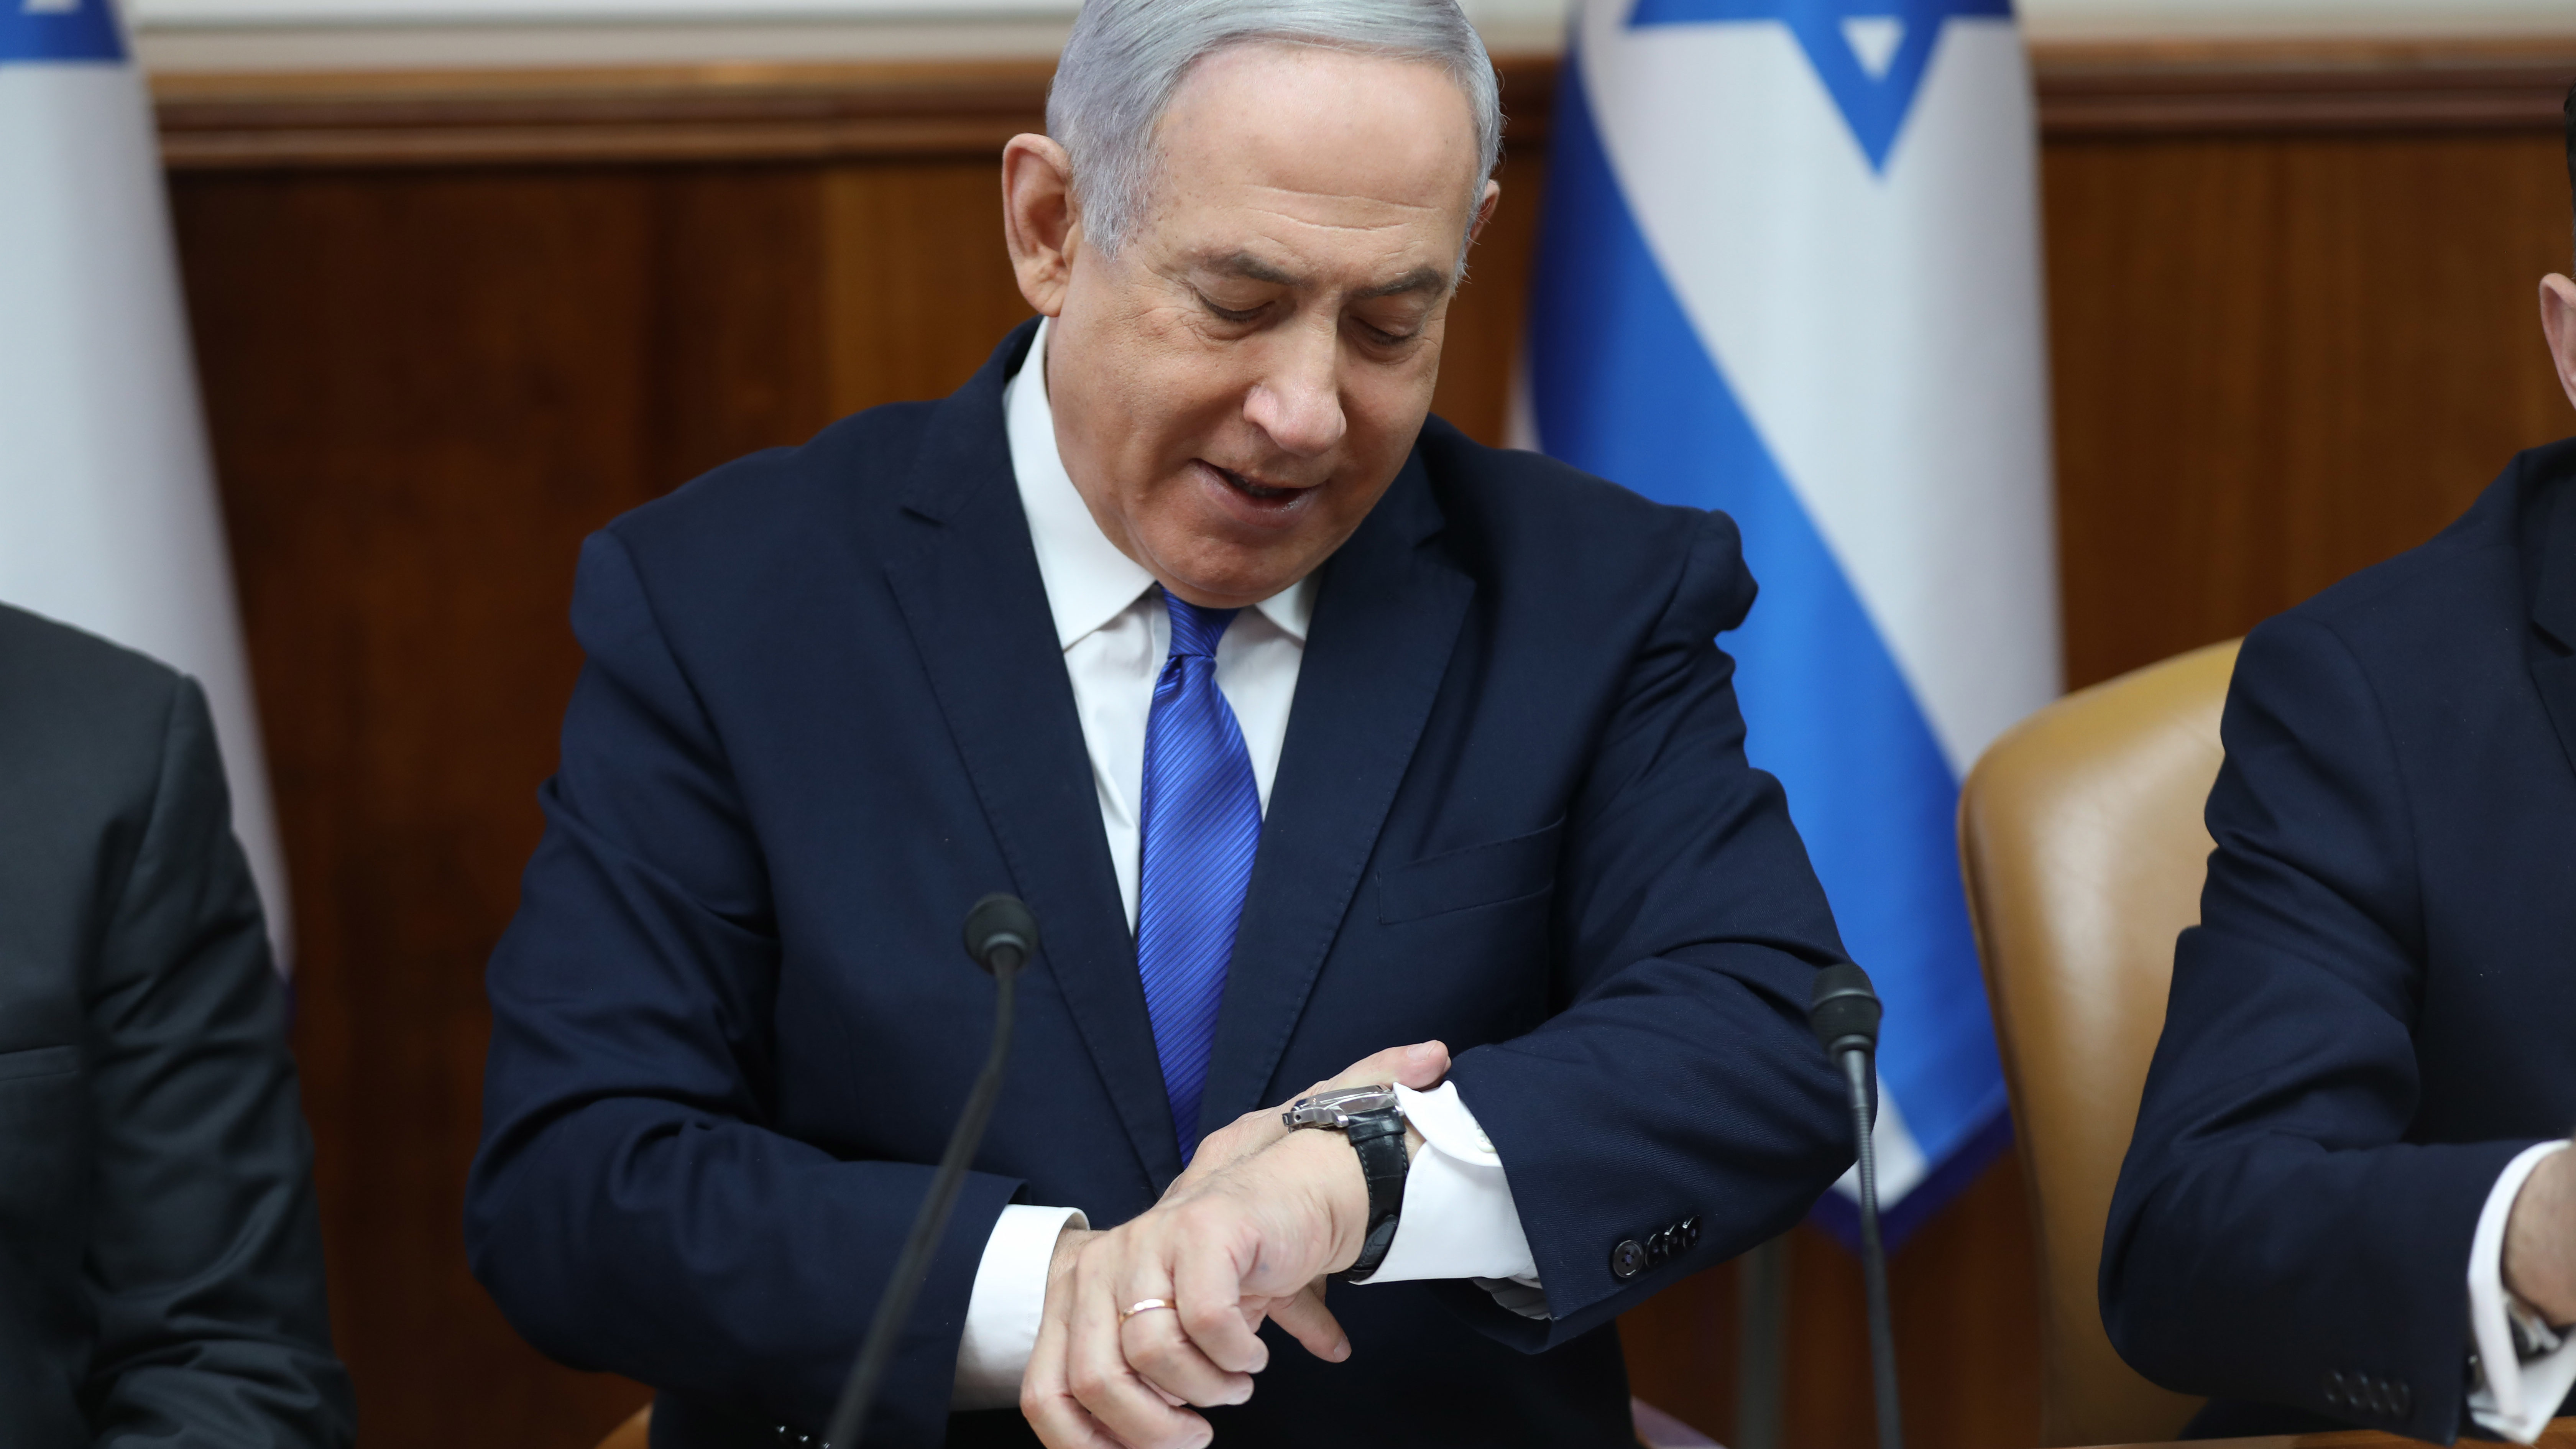 Netanyahu Legal Drama Could be Nearing End